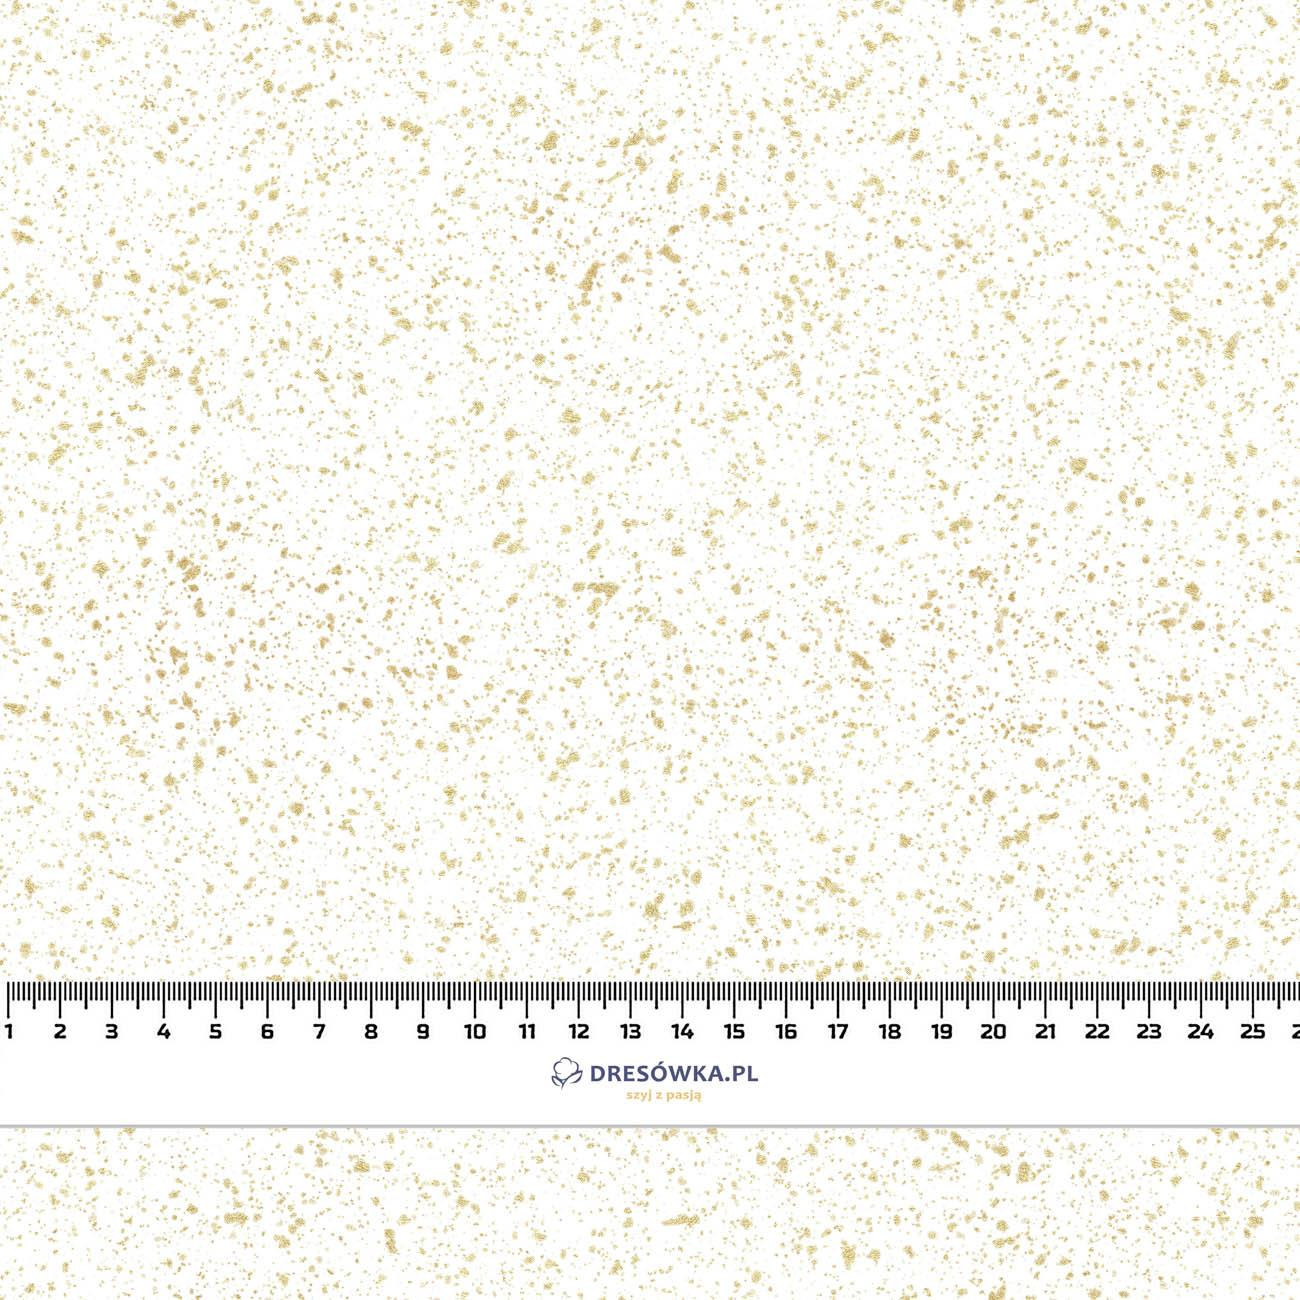 GOLDEN WINTER SKY (WHITE CHRISTMAS) - Woven Fabric for tablecloths